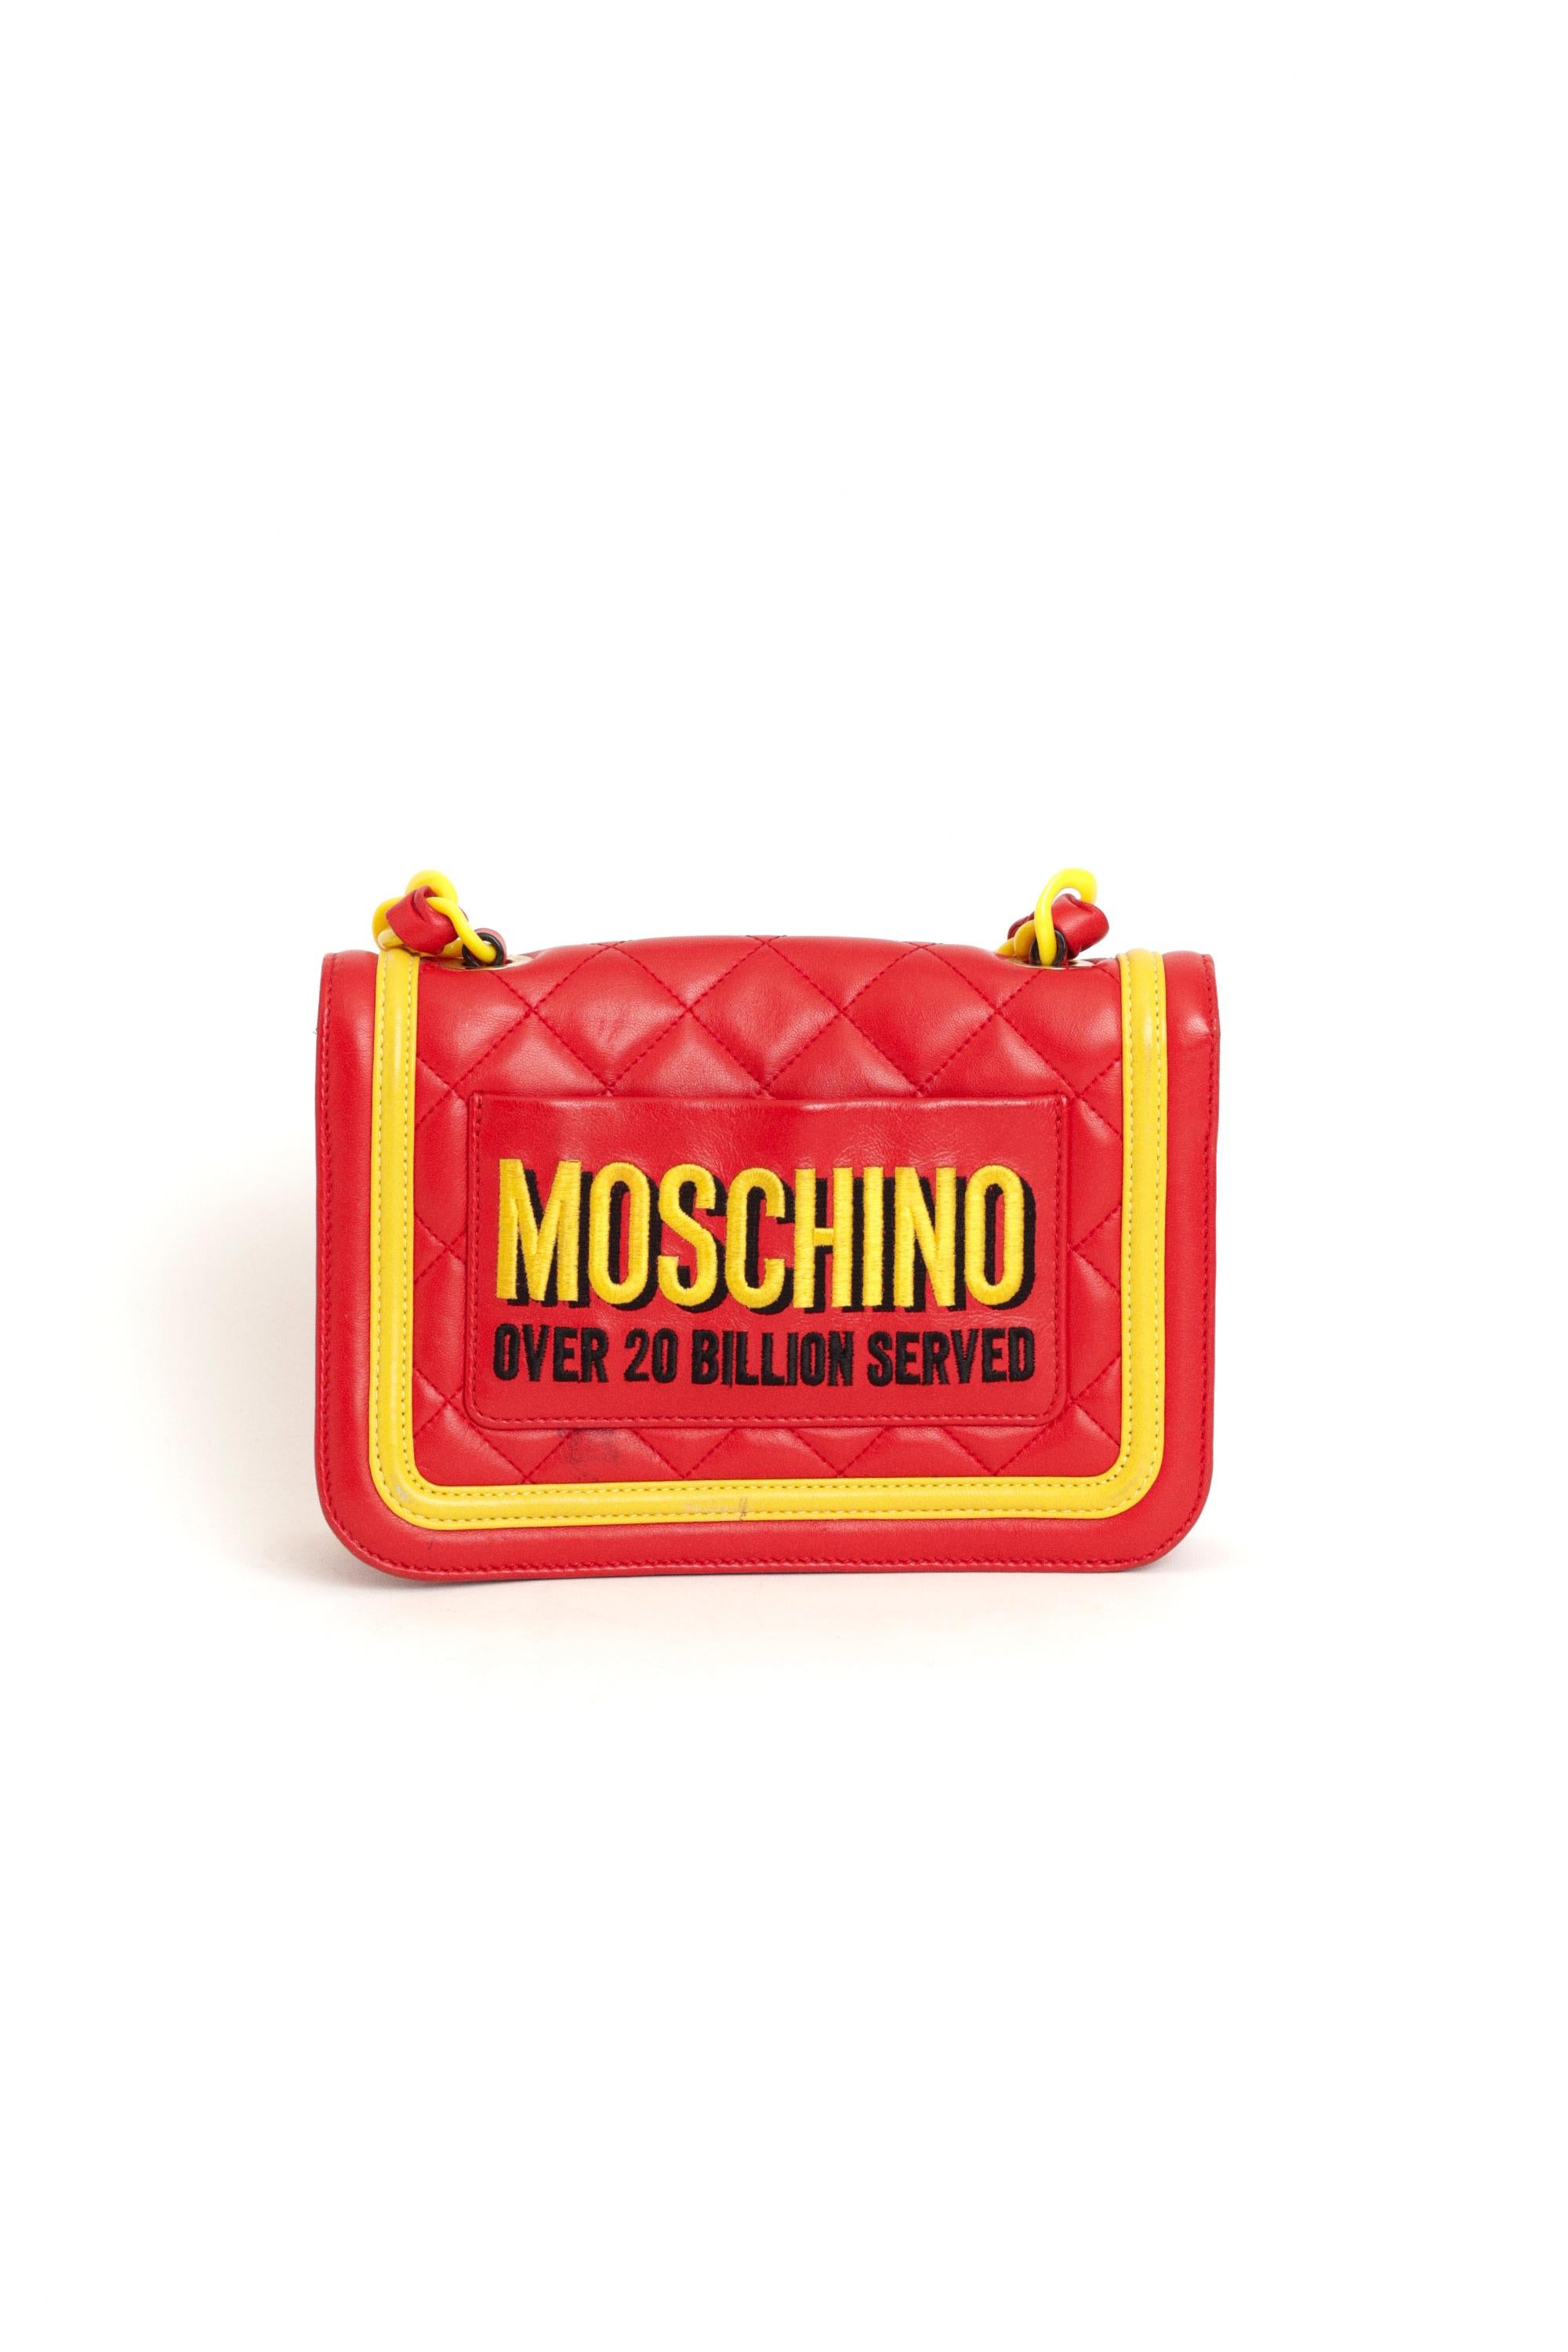 Moschino Fall Winter 2014 McDonald's red leather crossbody bag, from The FastFood Collection by Jeremy Scott. Features chain strap, two inside compartments, inside zip back pocket and an outside back pocket. Pre-loved, in great vintage condition,